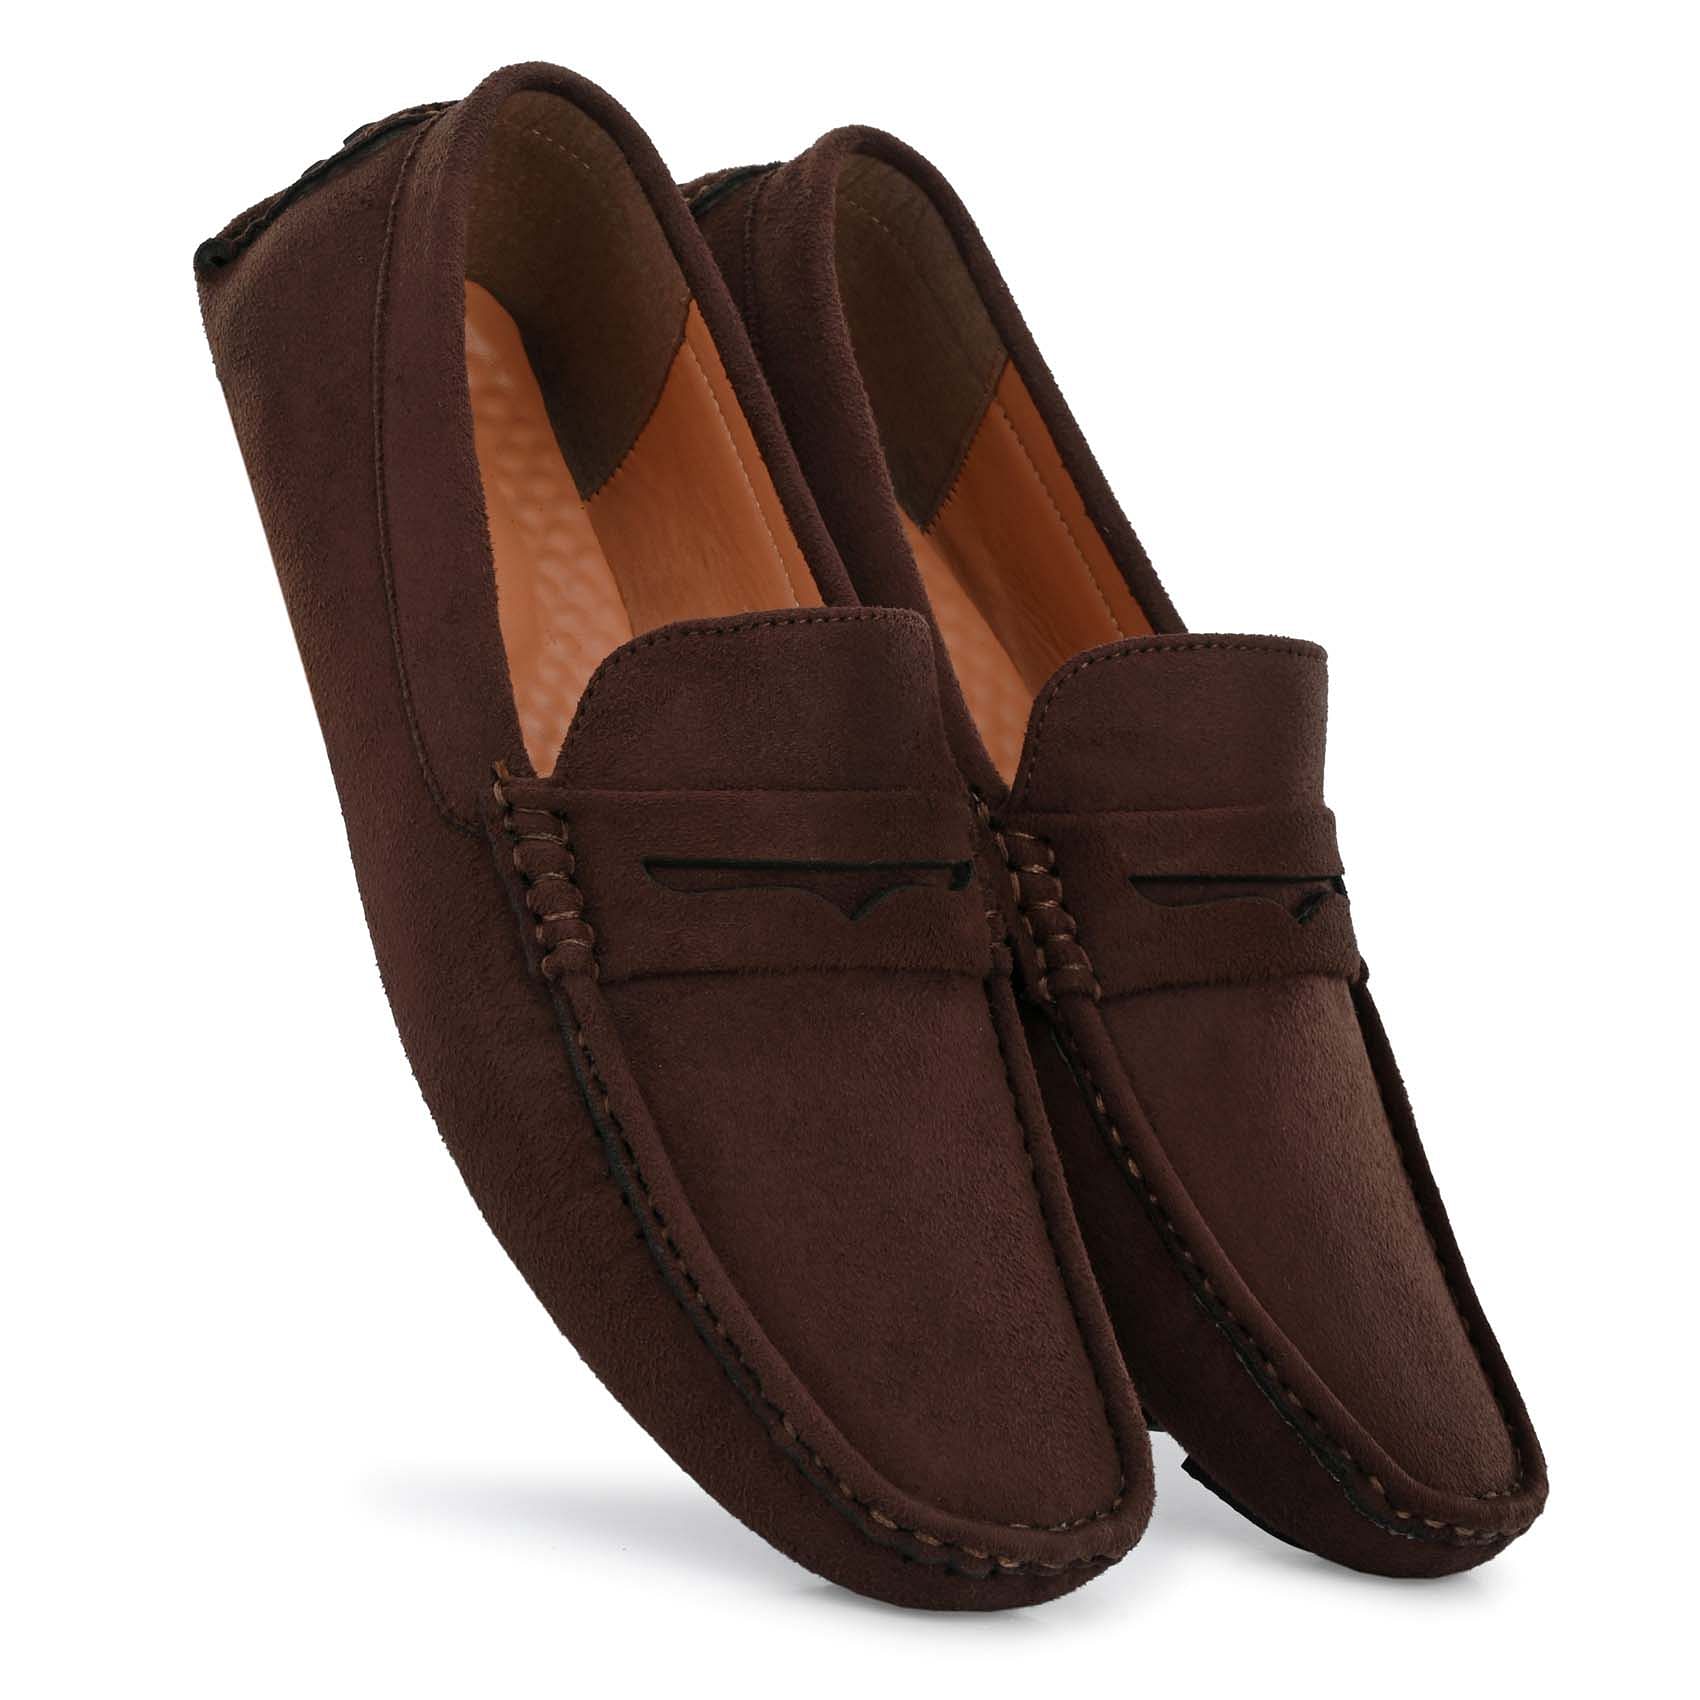 Pair-it Men's Loafers Shoes - Brown-LZ-Loafer107